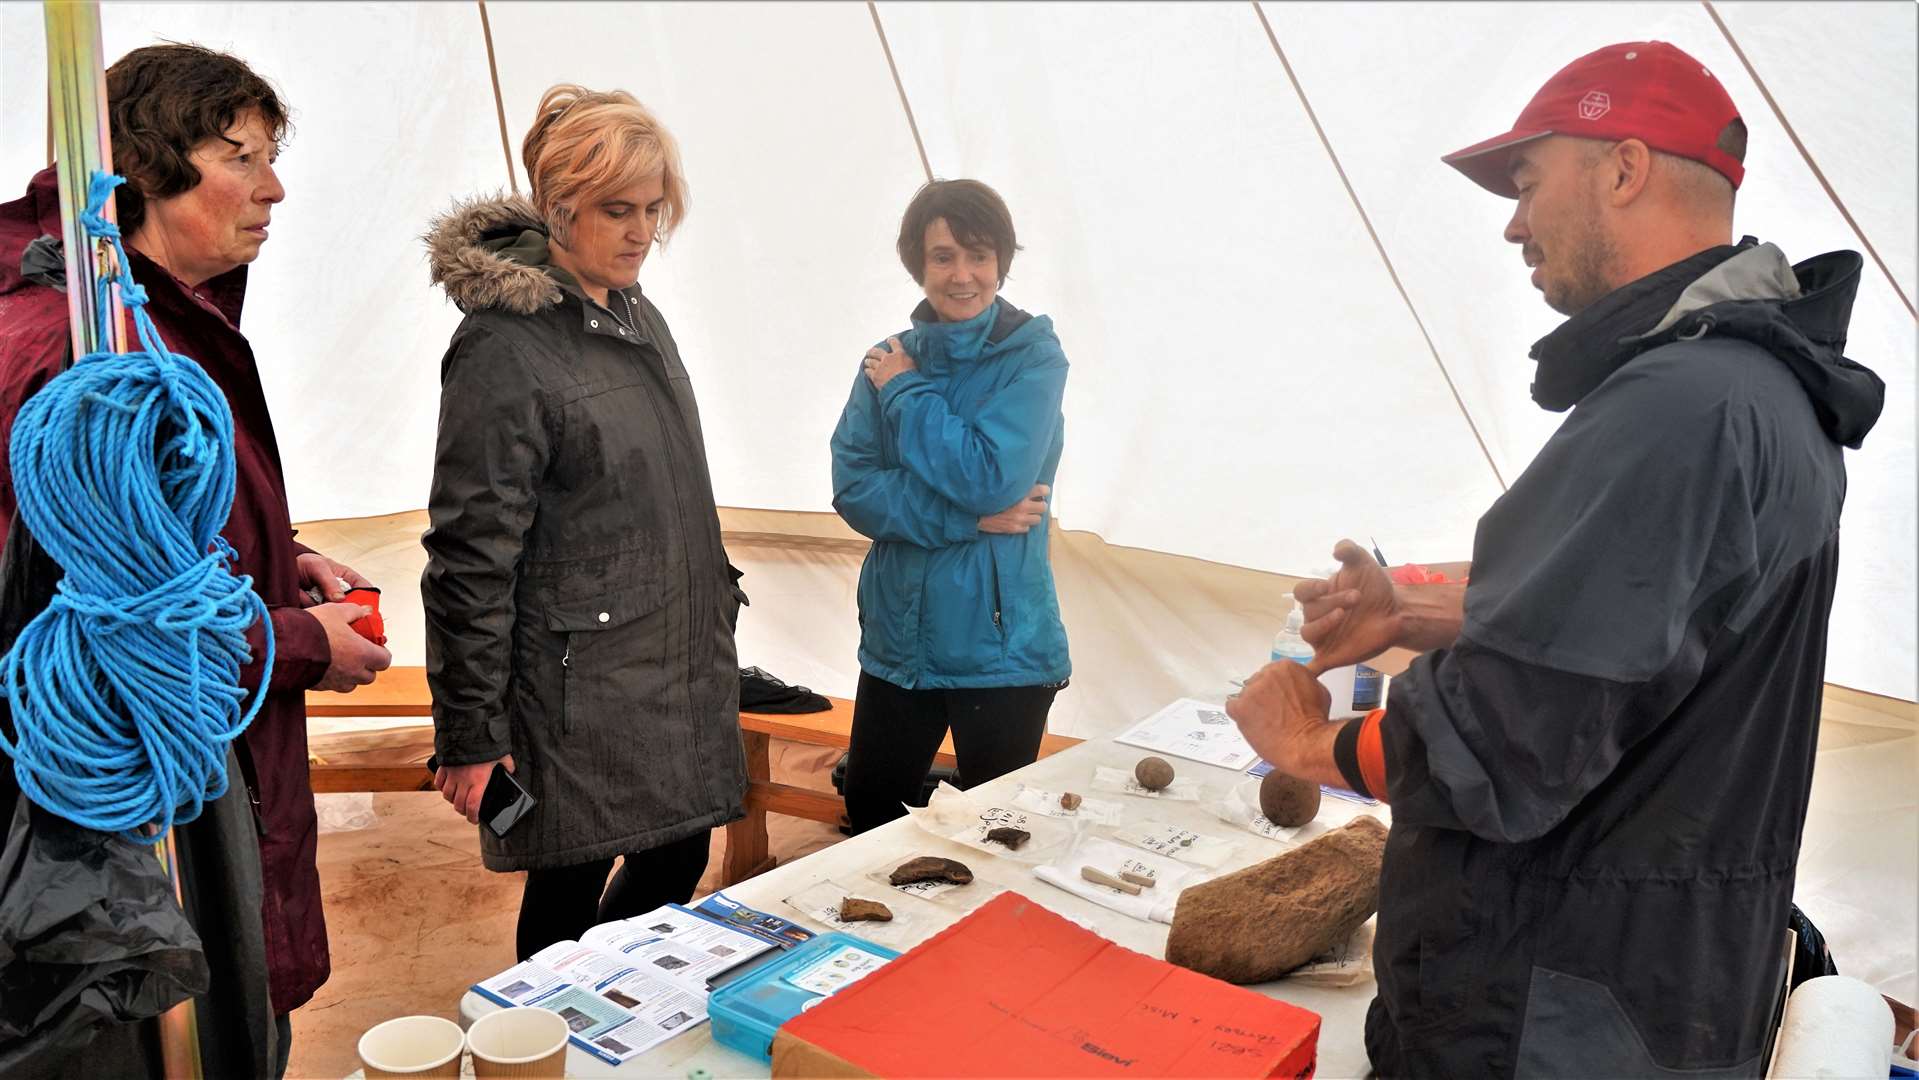 Rick Barton, project officer at the dig, shows some of the items recovered to members of the public at the open day event last year. Picture: DGS